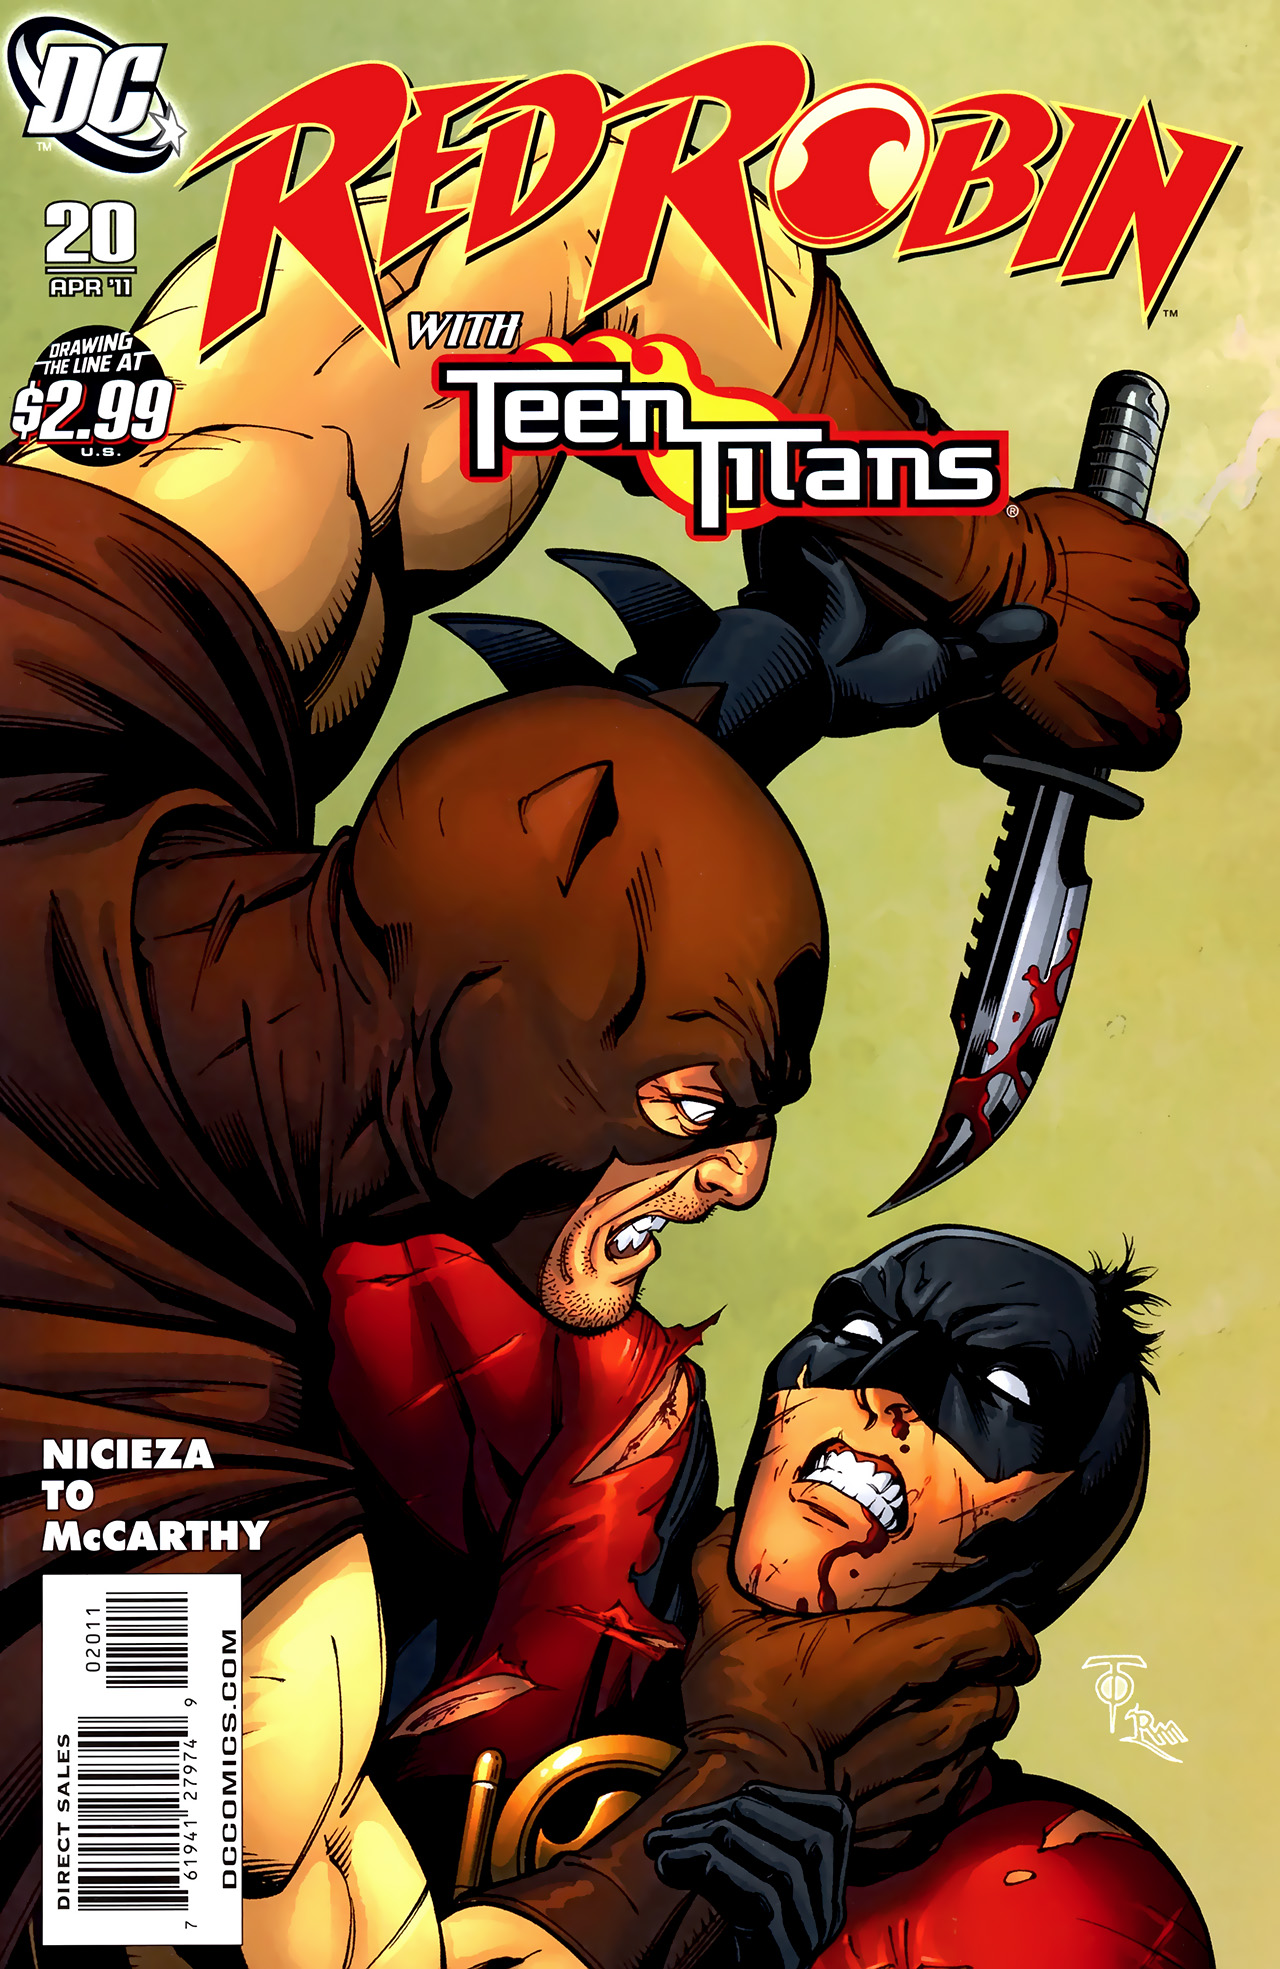 Read online Red Robin comic -  Issue #20 - 1